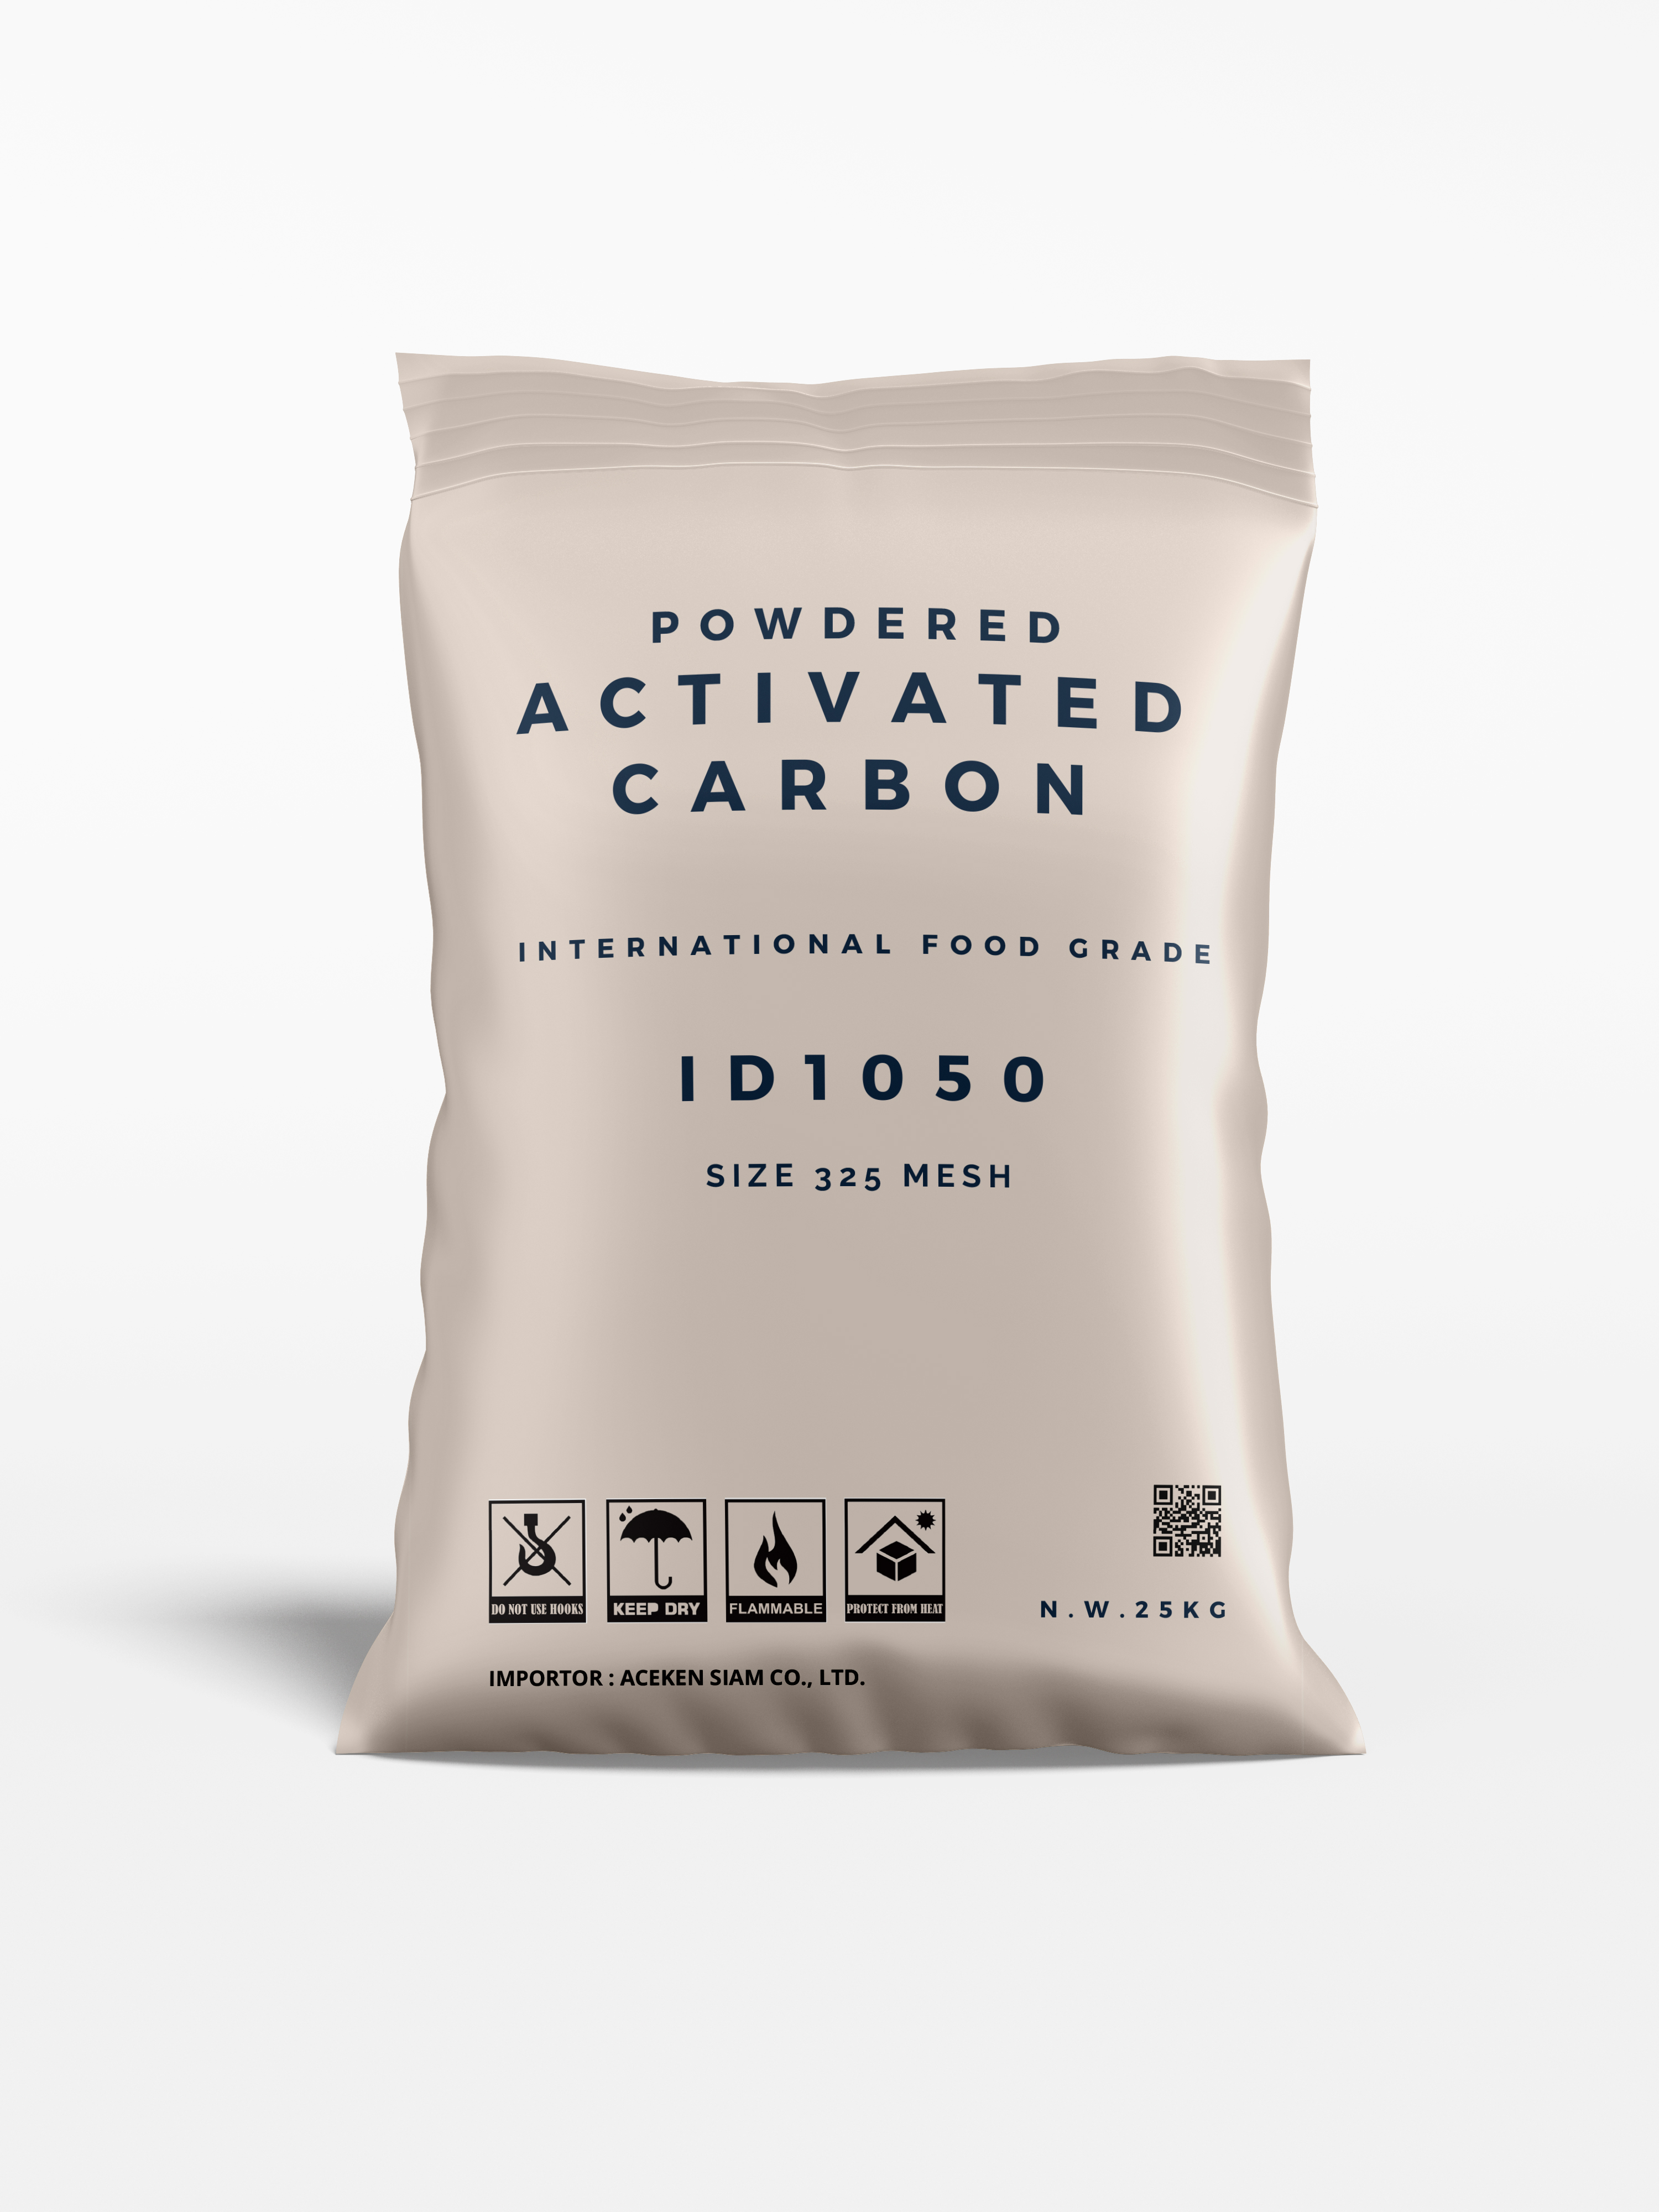 Powdered Activated Carbon ID1050 size 325 mesh International Food Grade